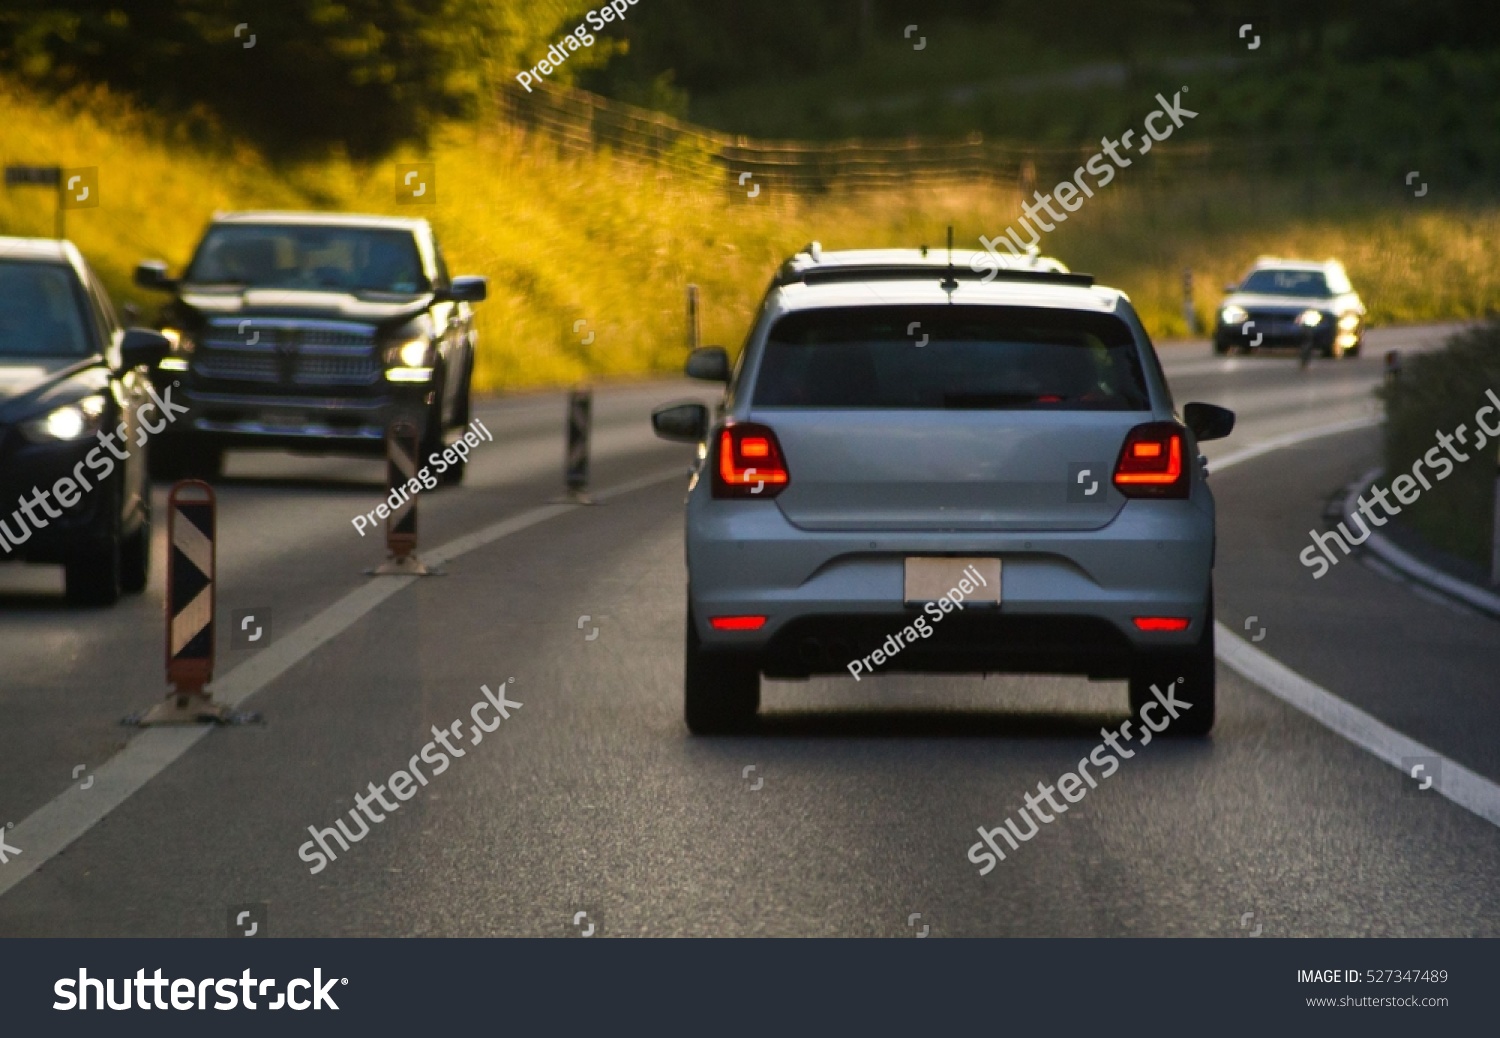 Cars on busy road driving in evening #527347489